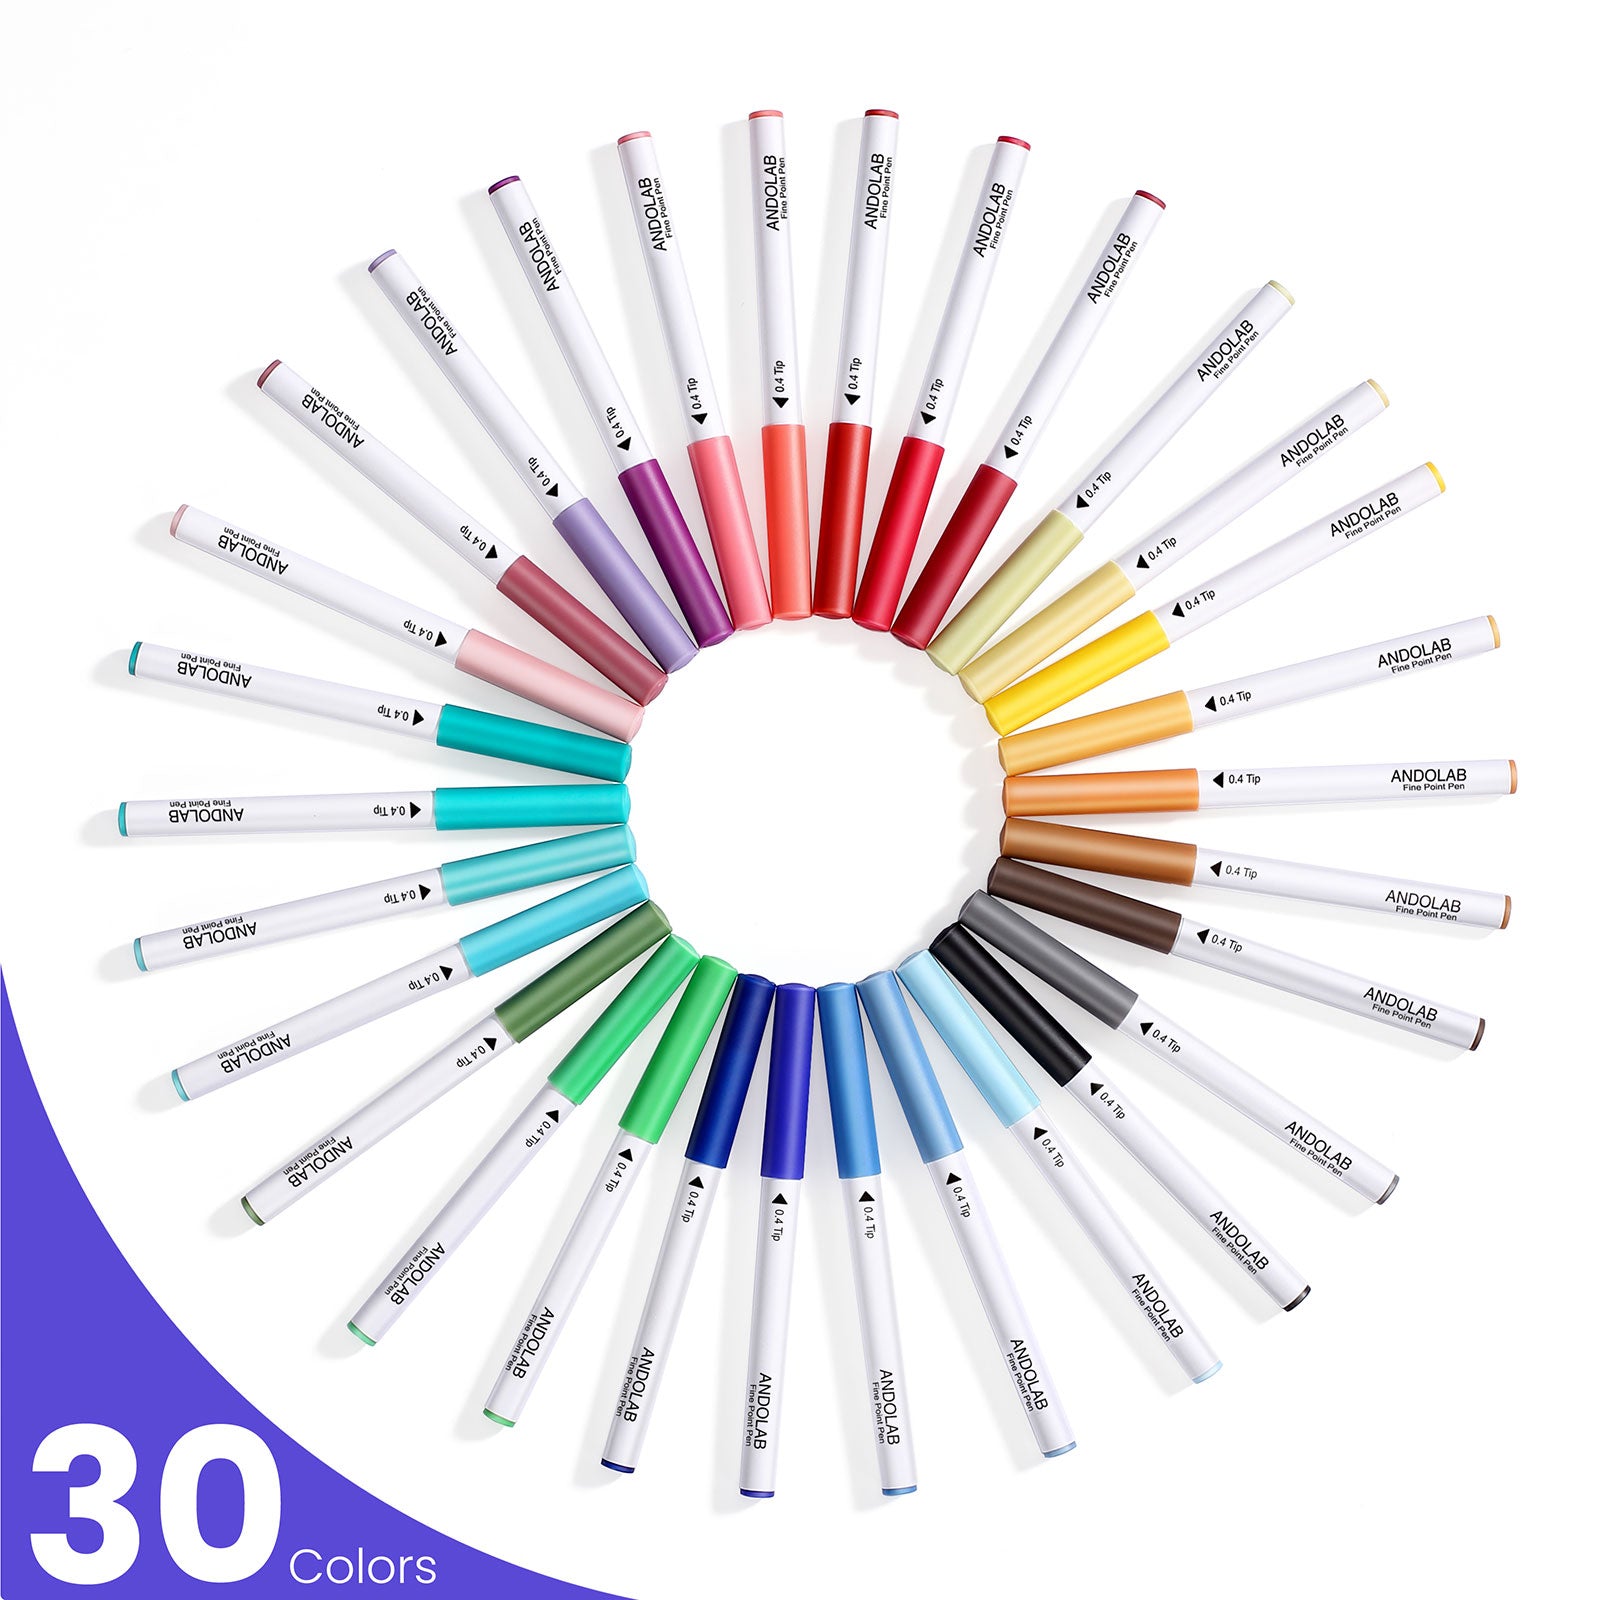 ANDOLAB 0.4 Tip Fine Point Pens for Cricut ,30 Pack Ultimate Fine Poin